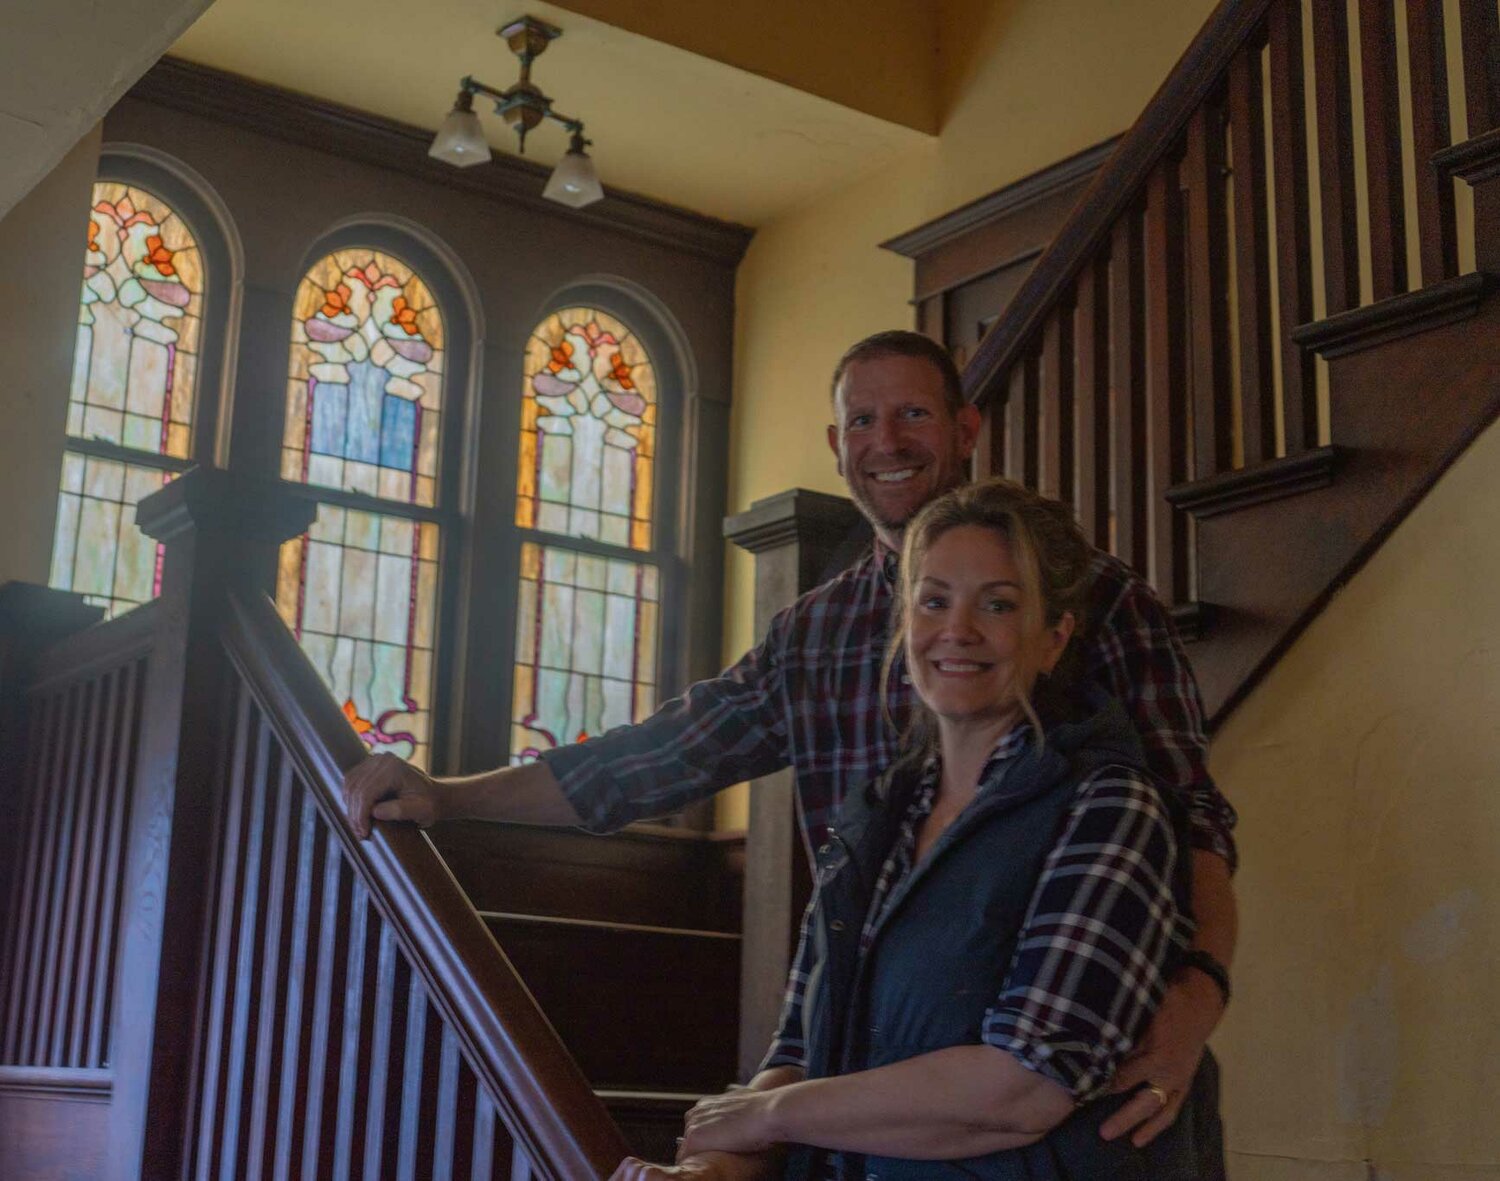 Rachel and Wayne Vezzetti stand on the staircase of their newly purchased historic home. They hope to keep as much of the original detail as possible in the home including the stained glass and wood railings pictured.